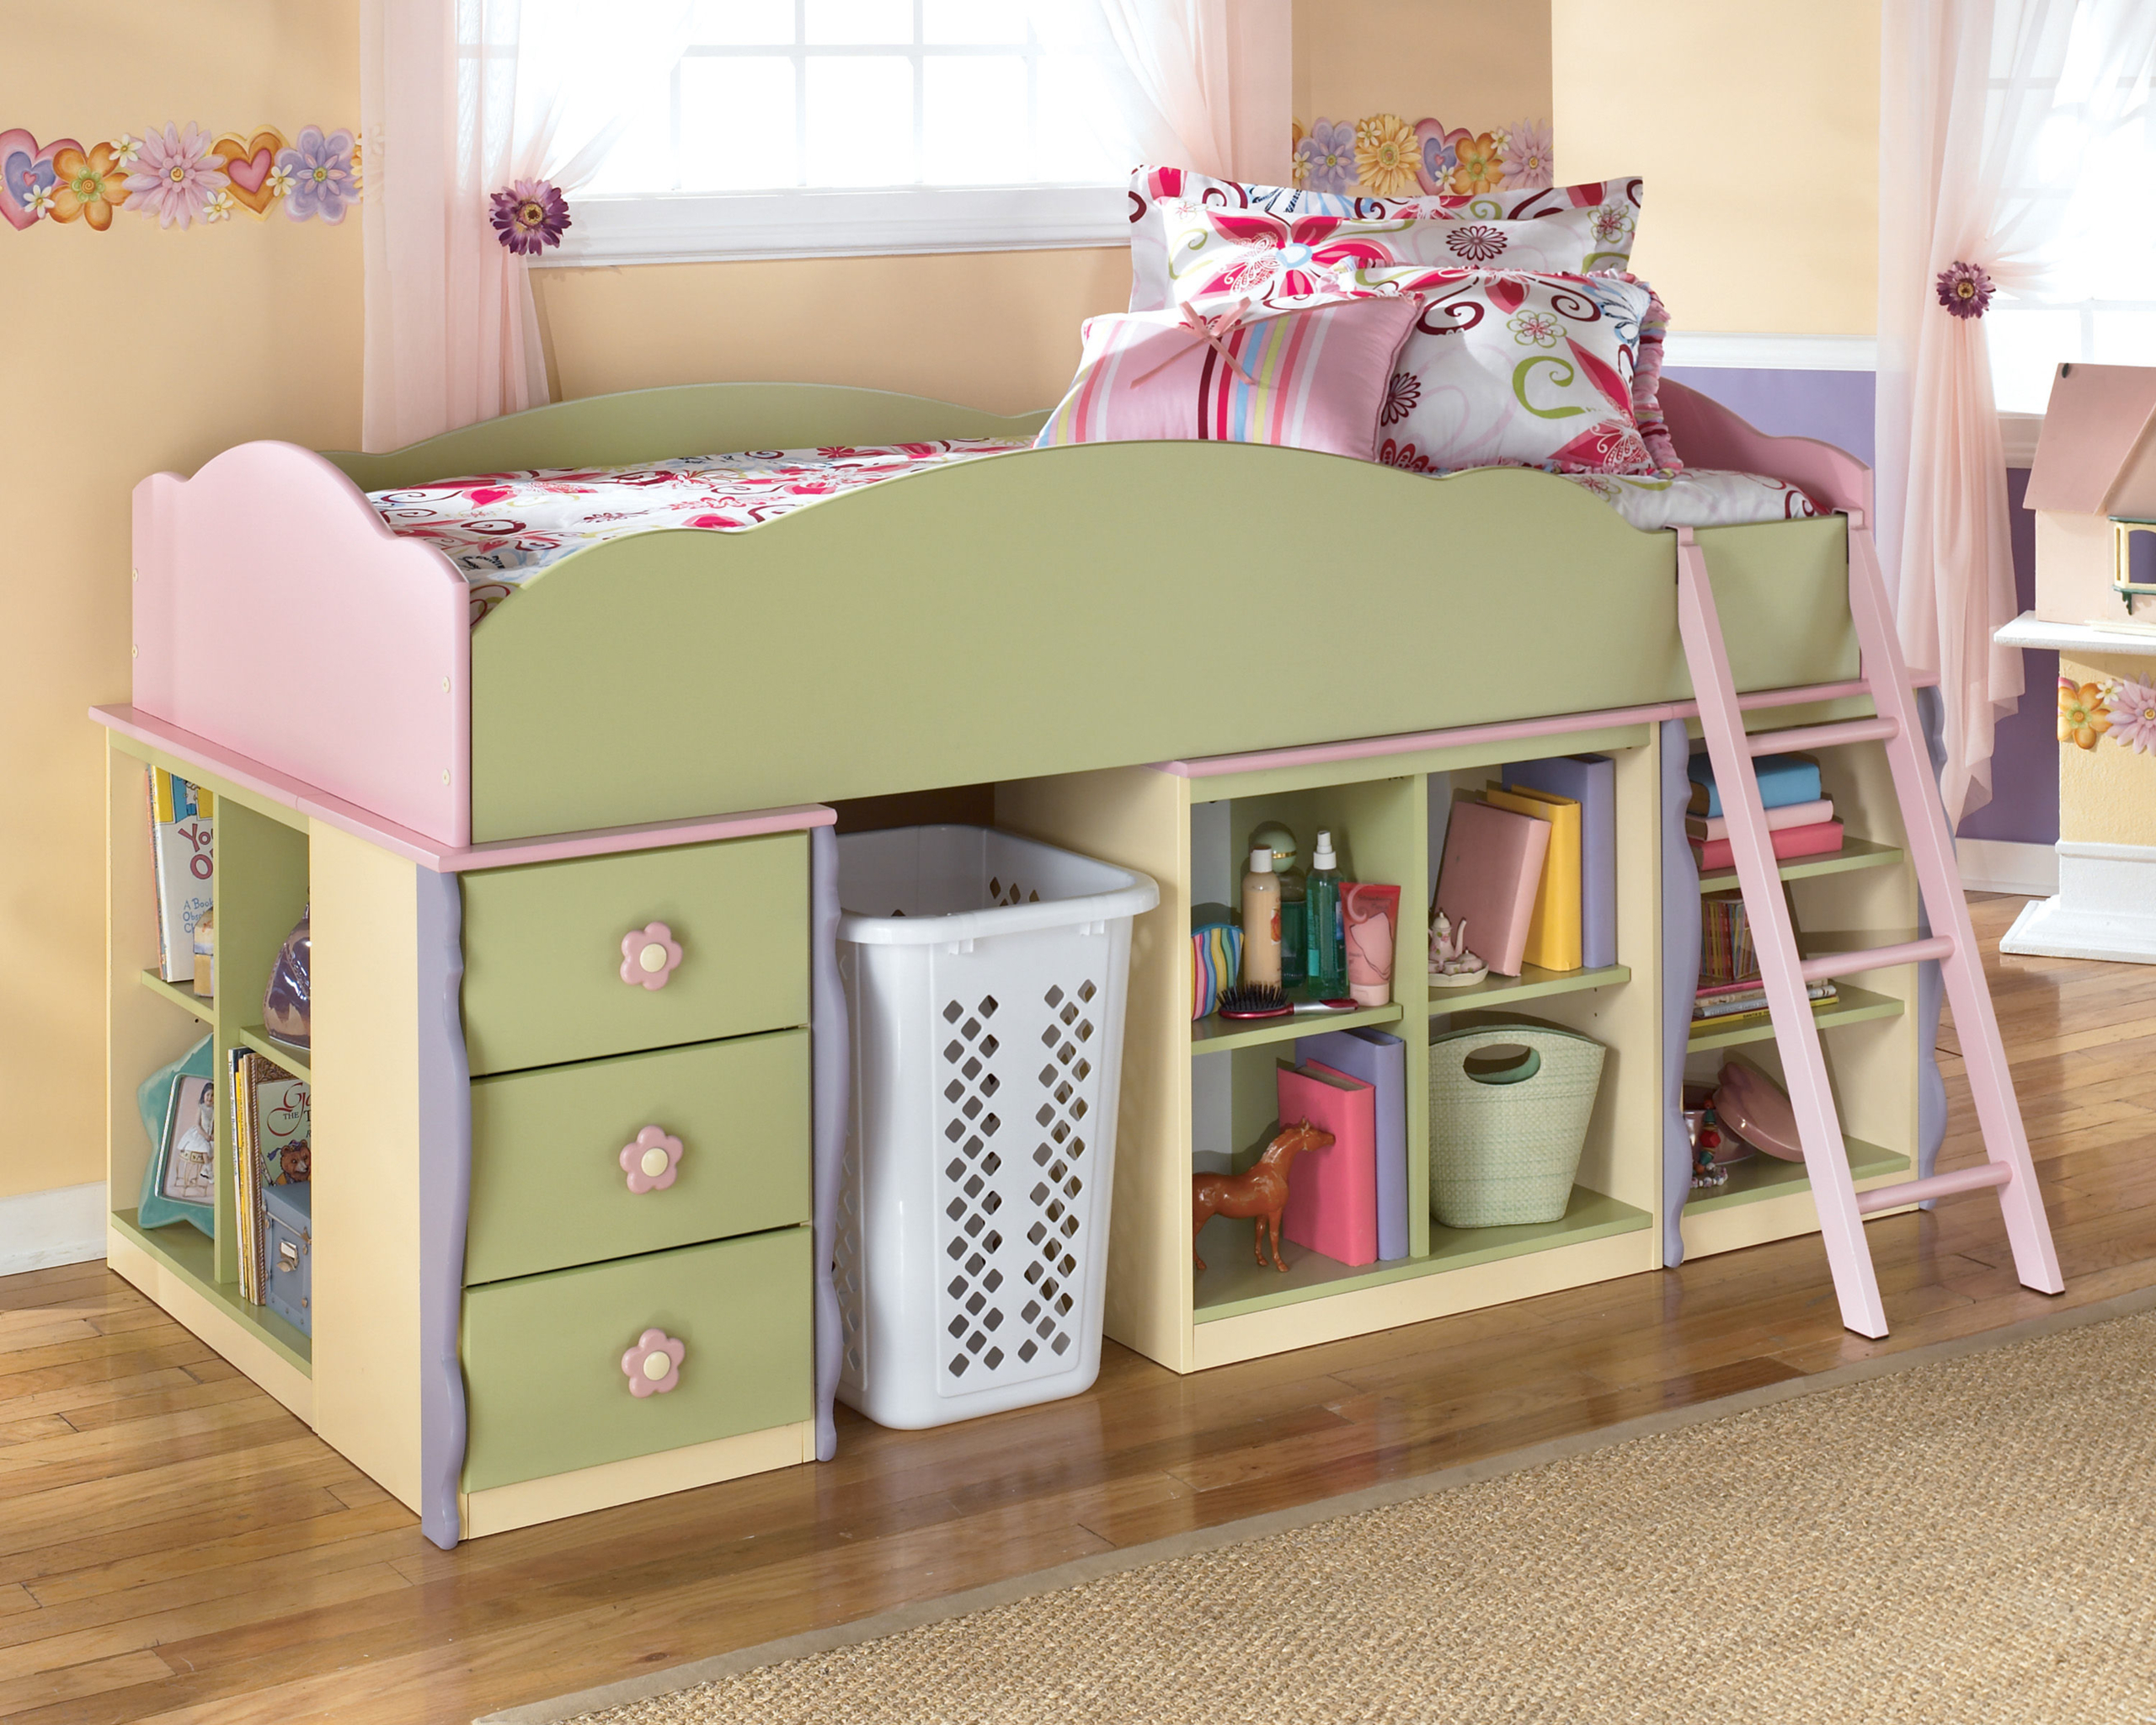 How to make doll bunk beds